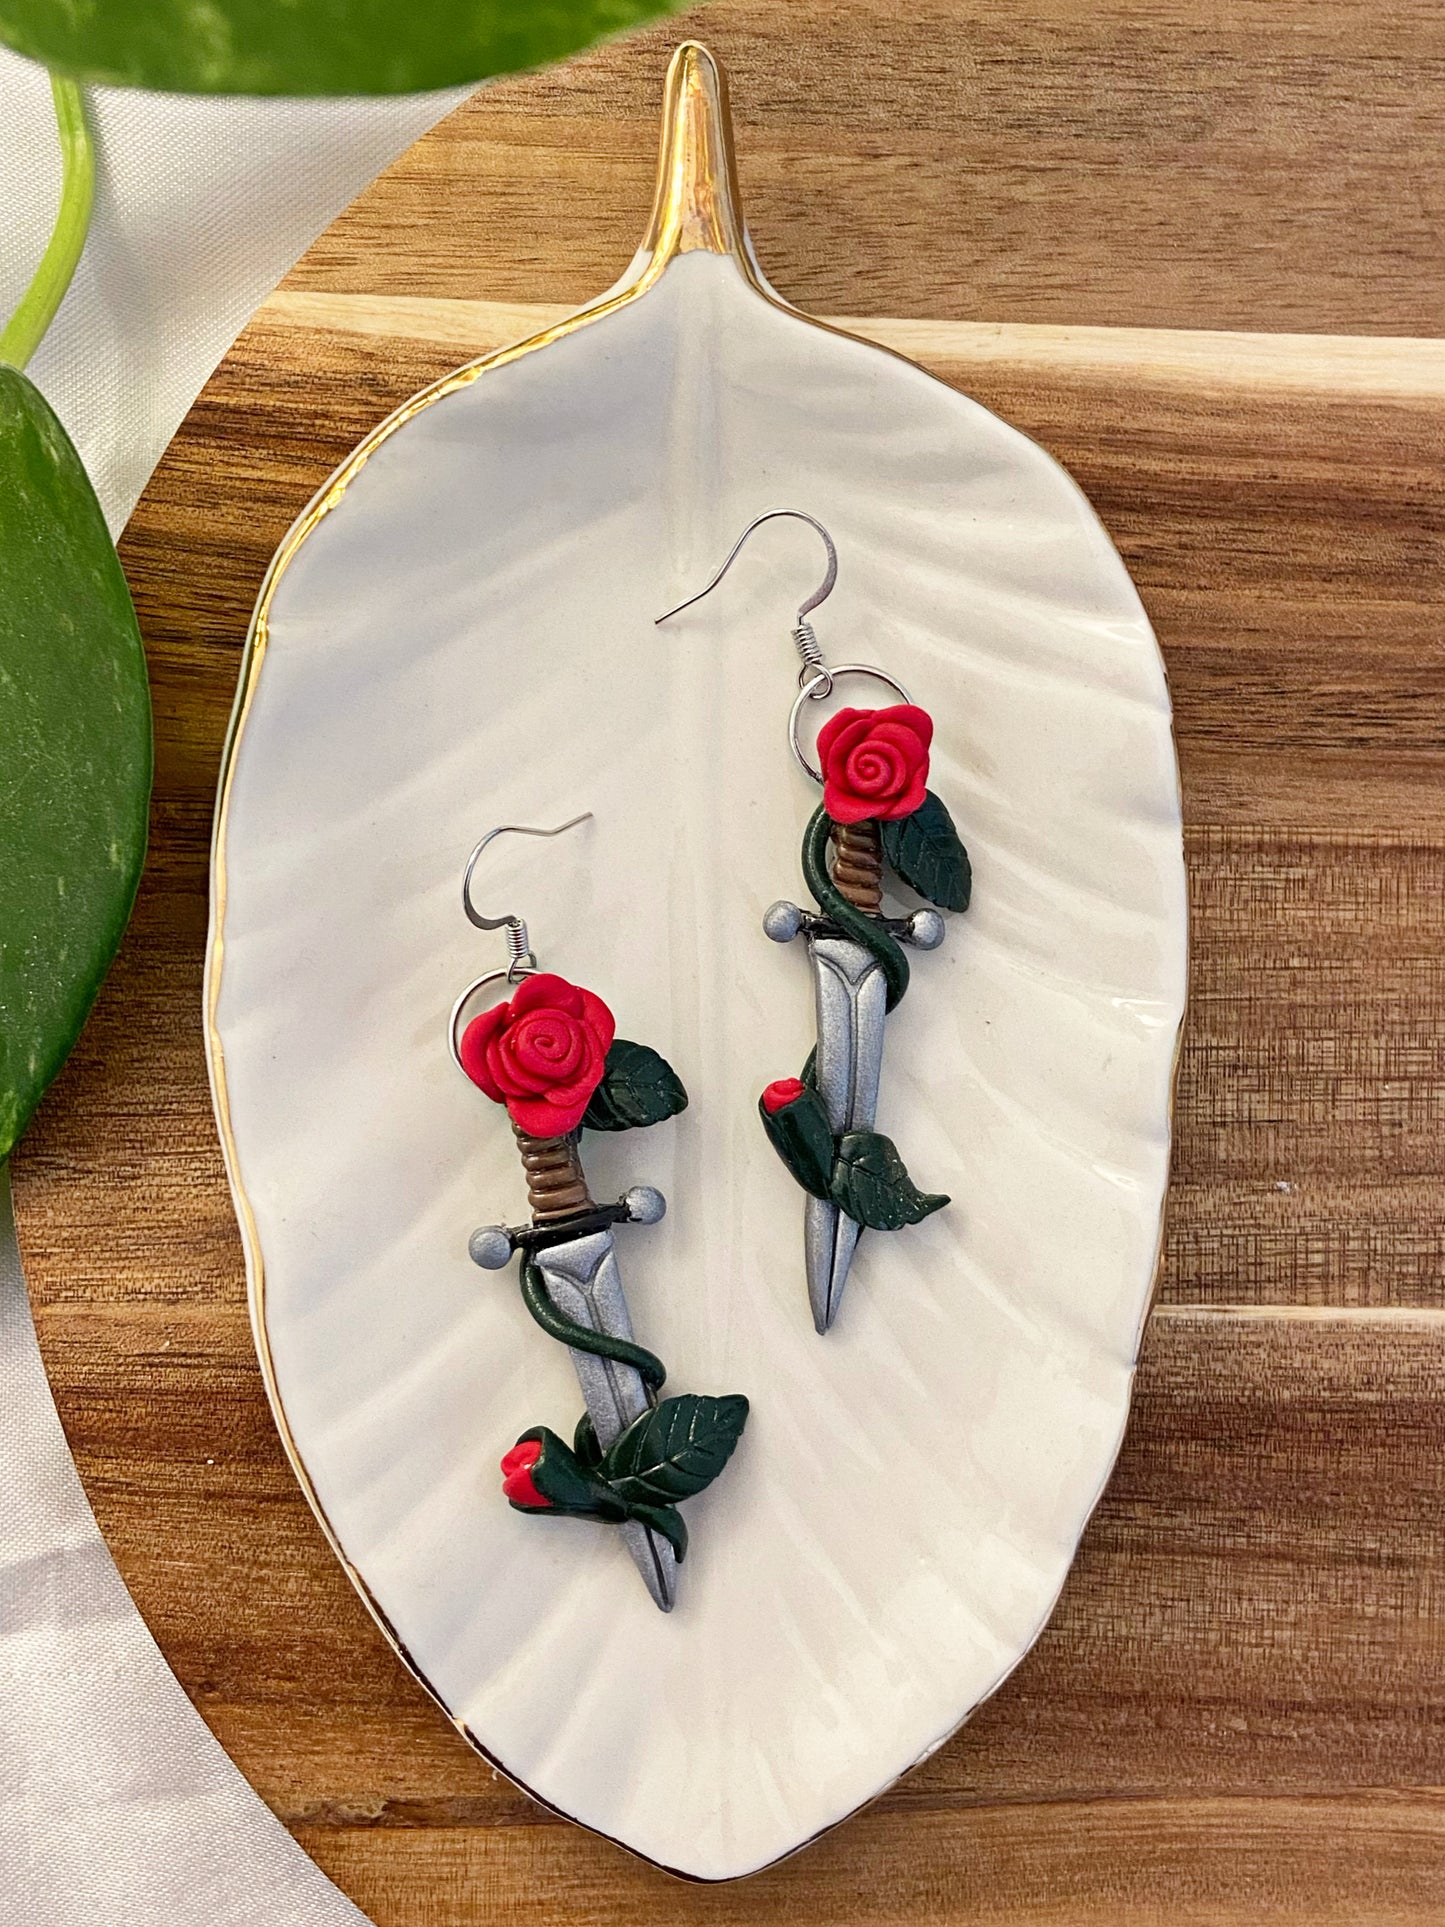 Sculpted Swords- Red rose handmade polymer clay sword earrings, novelty romance jewelry